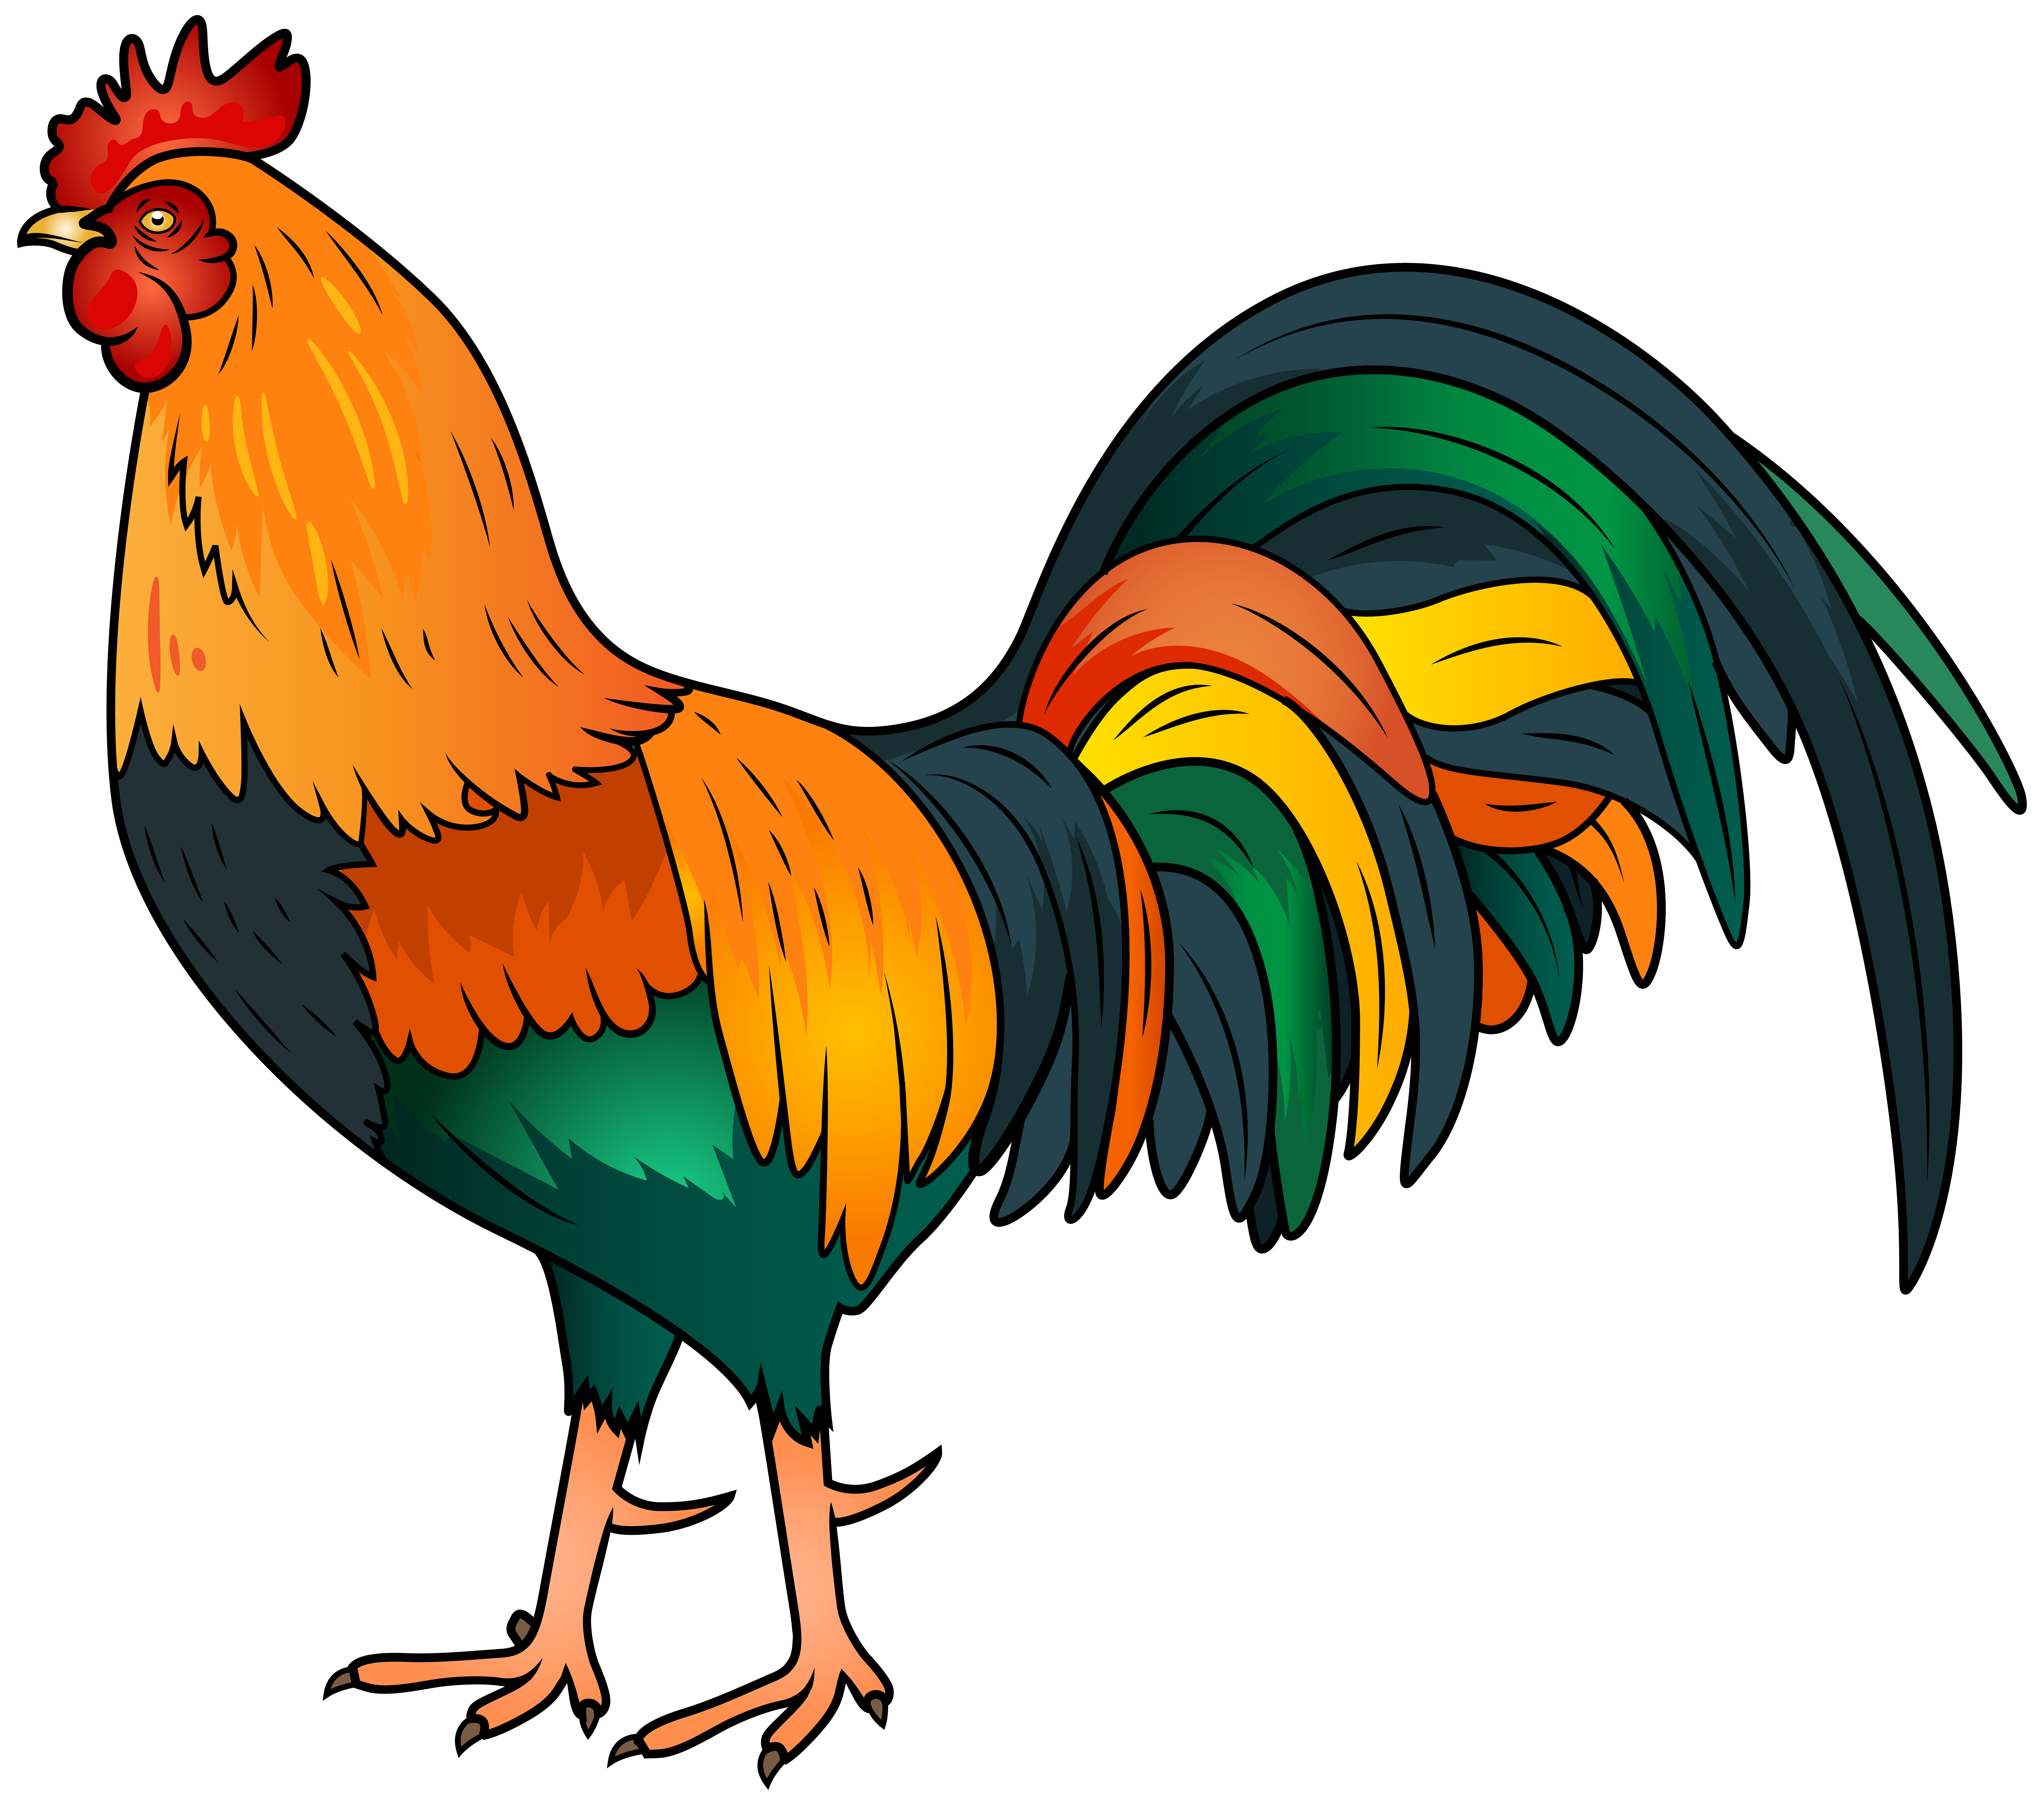 free vector clip art rooster - photo #8